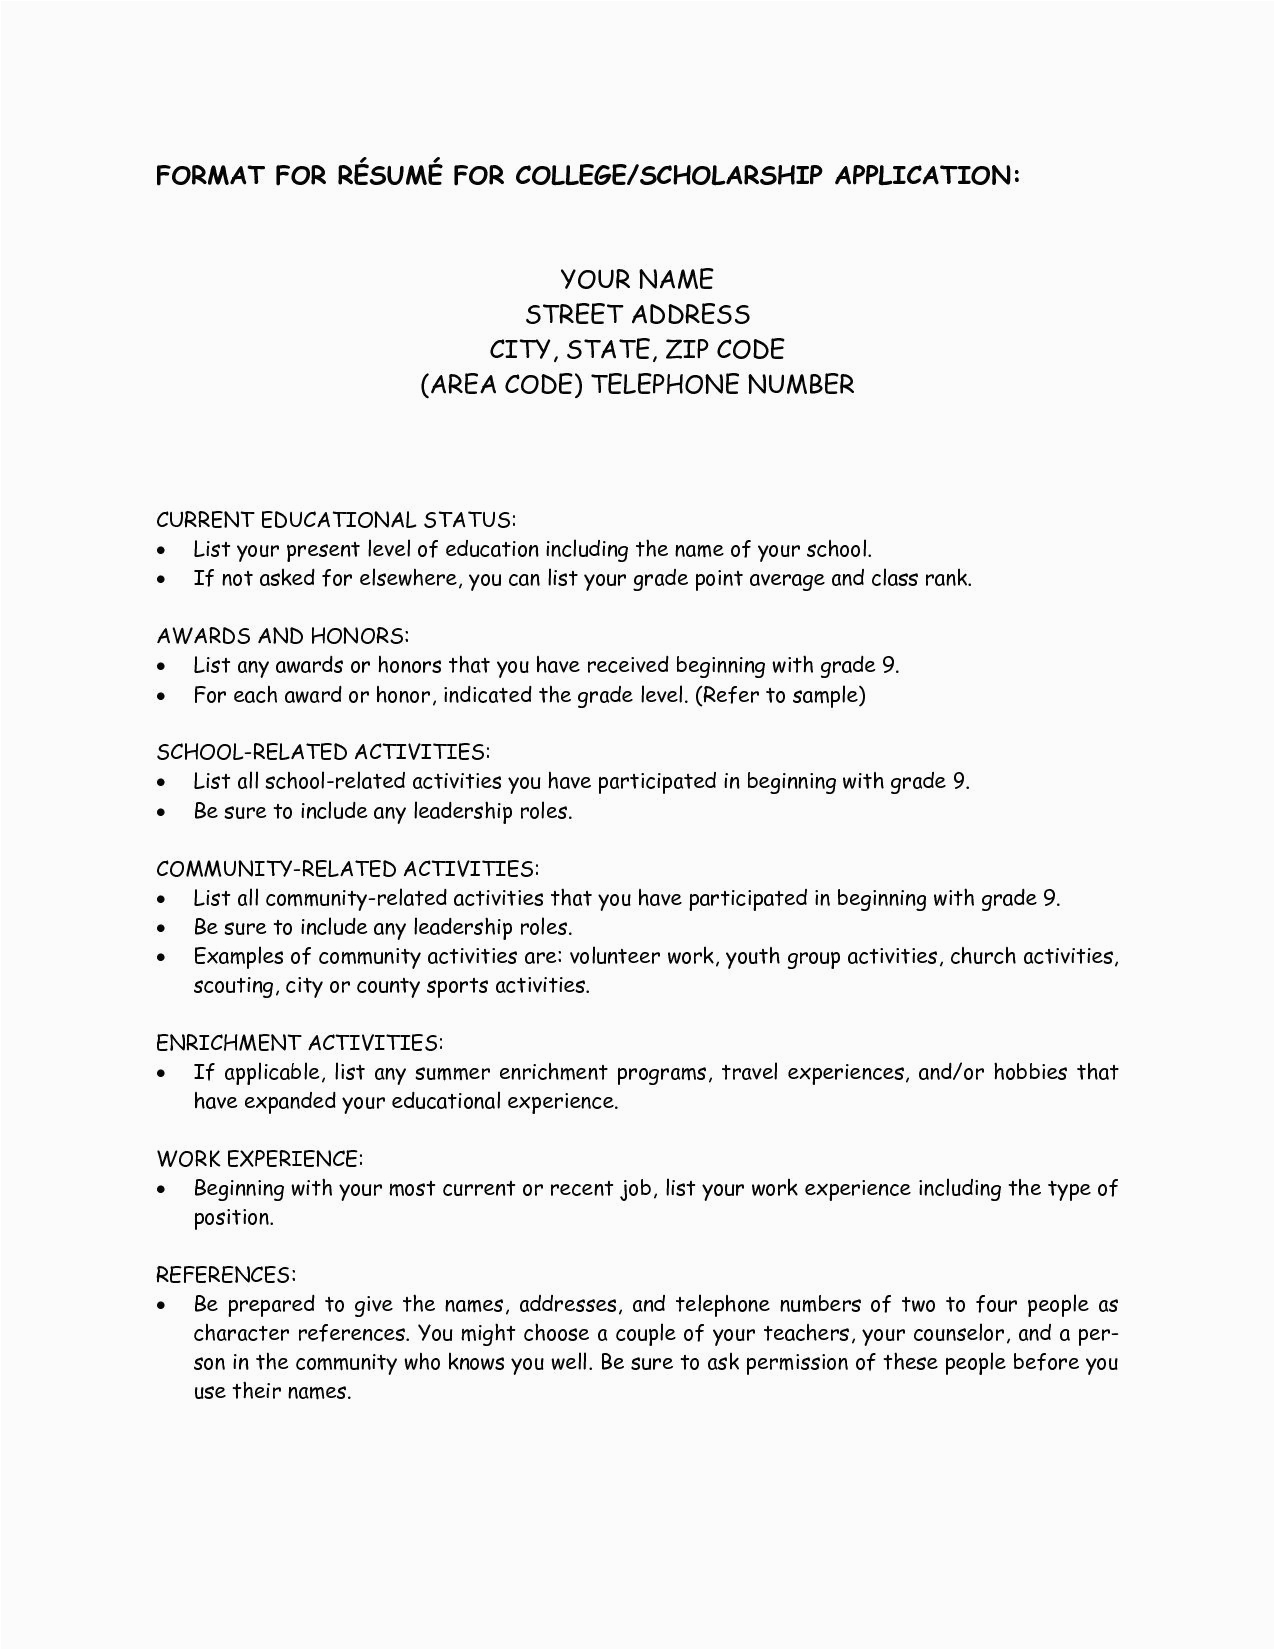 Resume for College Scholarship Application Template College Scholarship Resume Template 1197